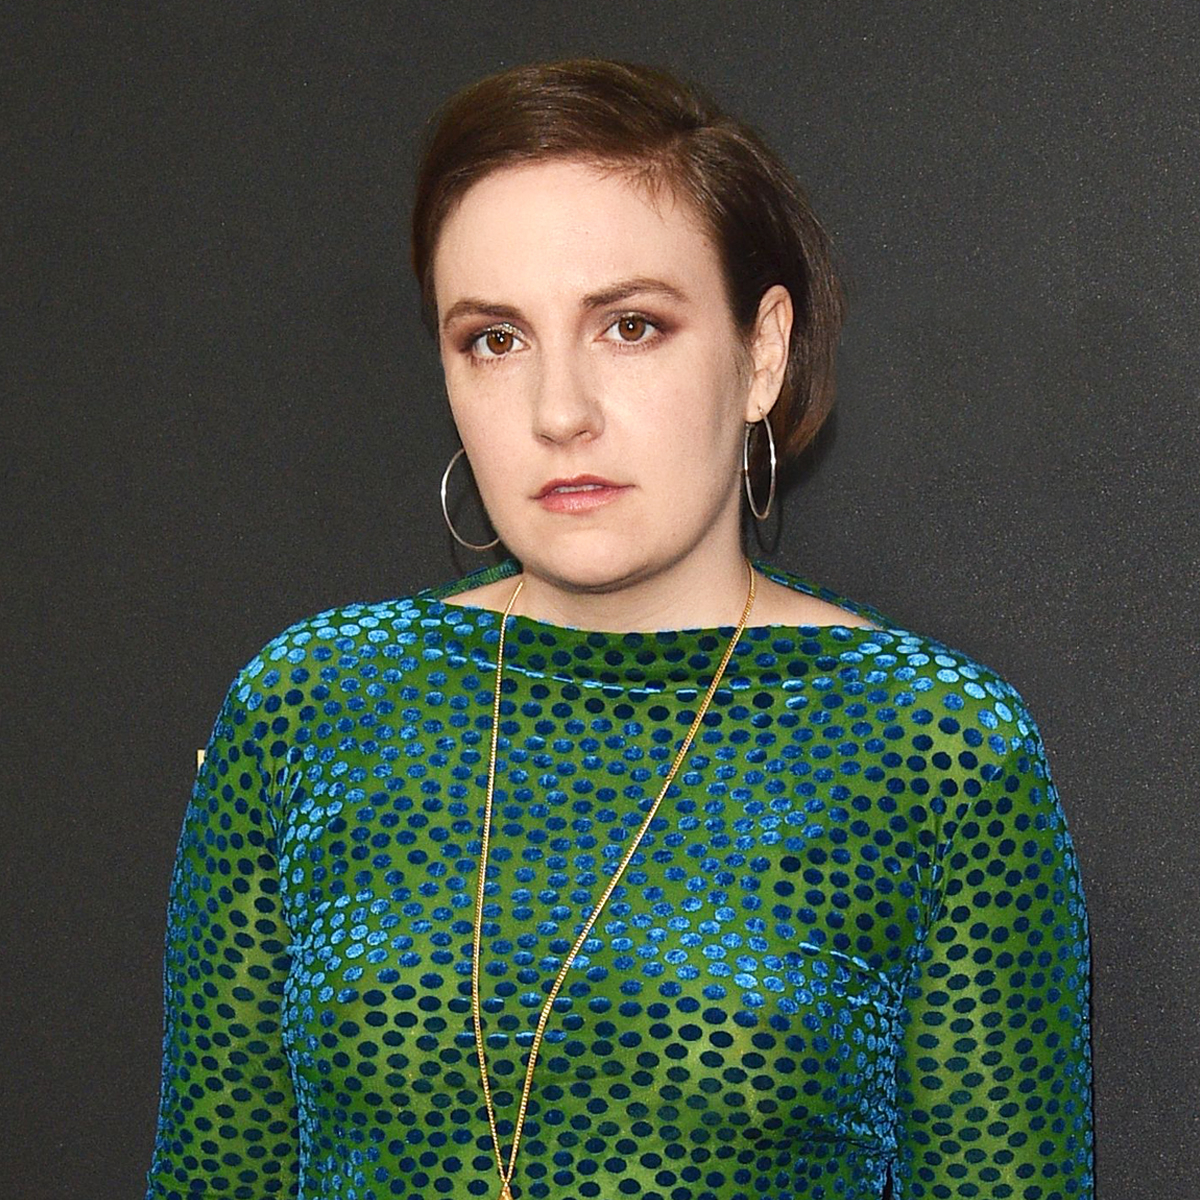 Lena Dunham Has a Message for Body Shamers Criticizing Her Appearance in Wedding Photos thumbnail